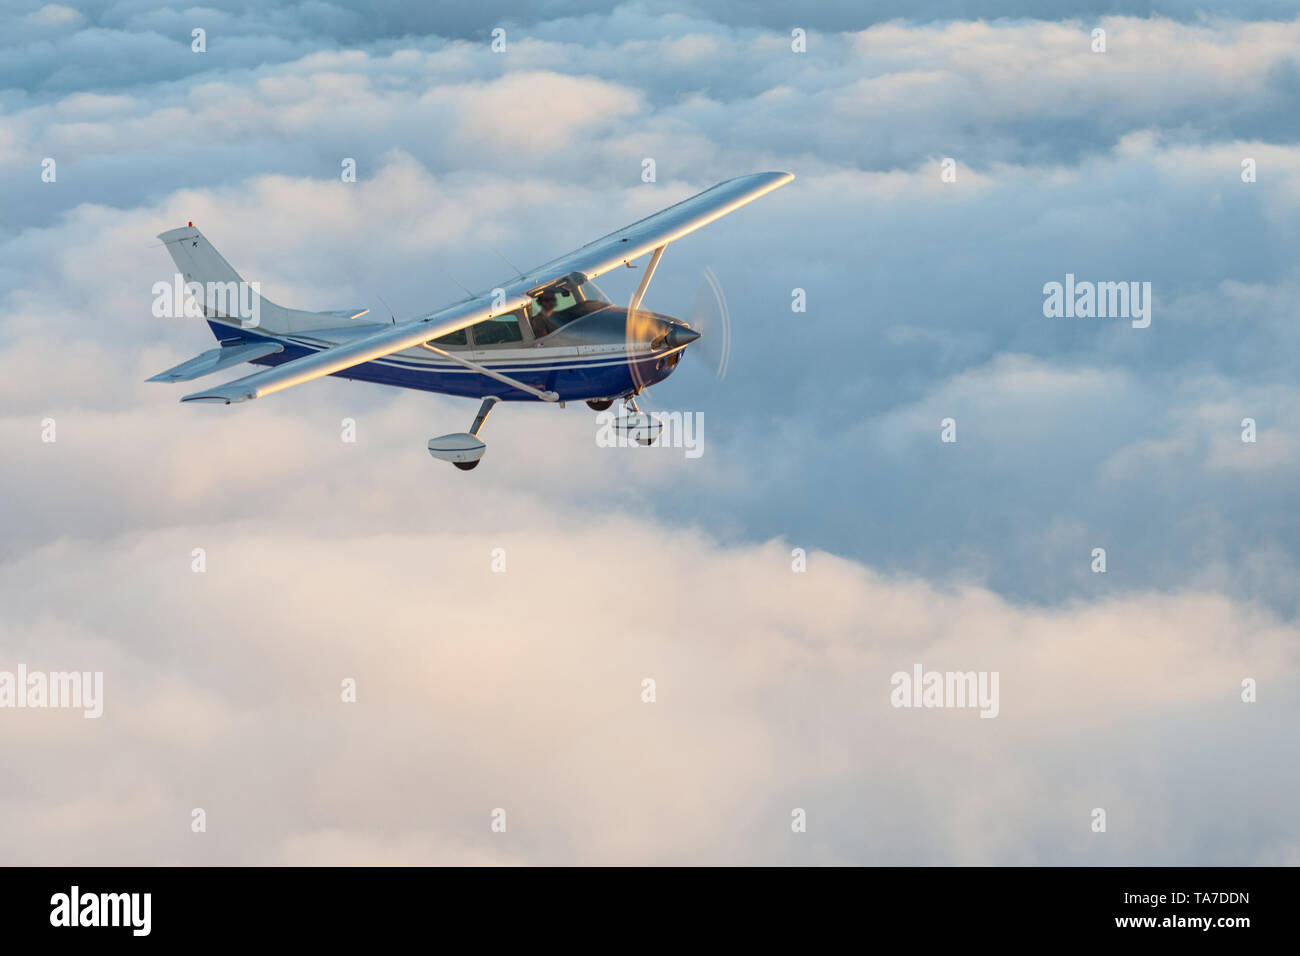 Stunning view of a blue and white little private Cessna airplane browsing the sky over fluffy clouds. Stock Photo